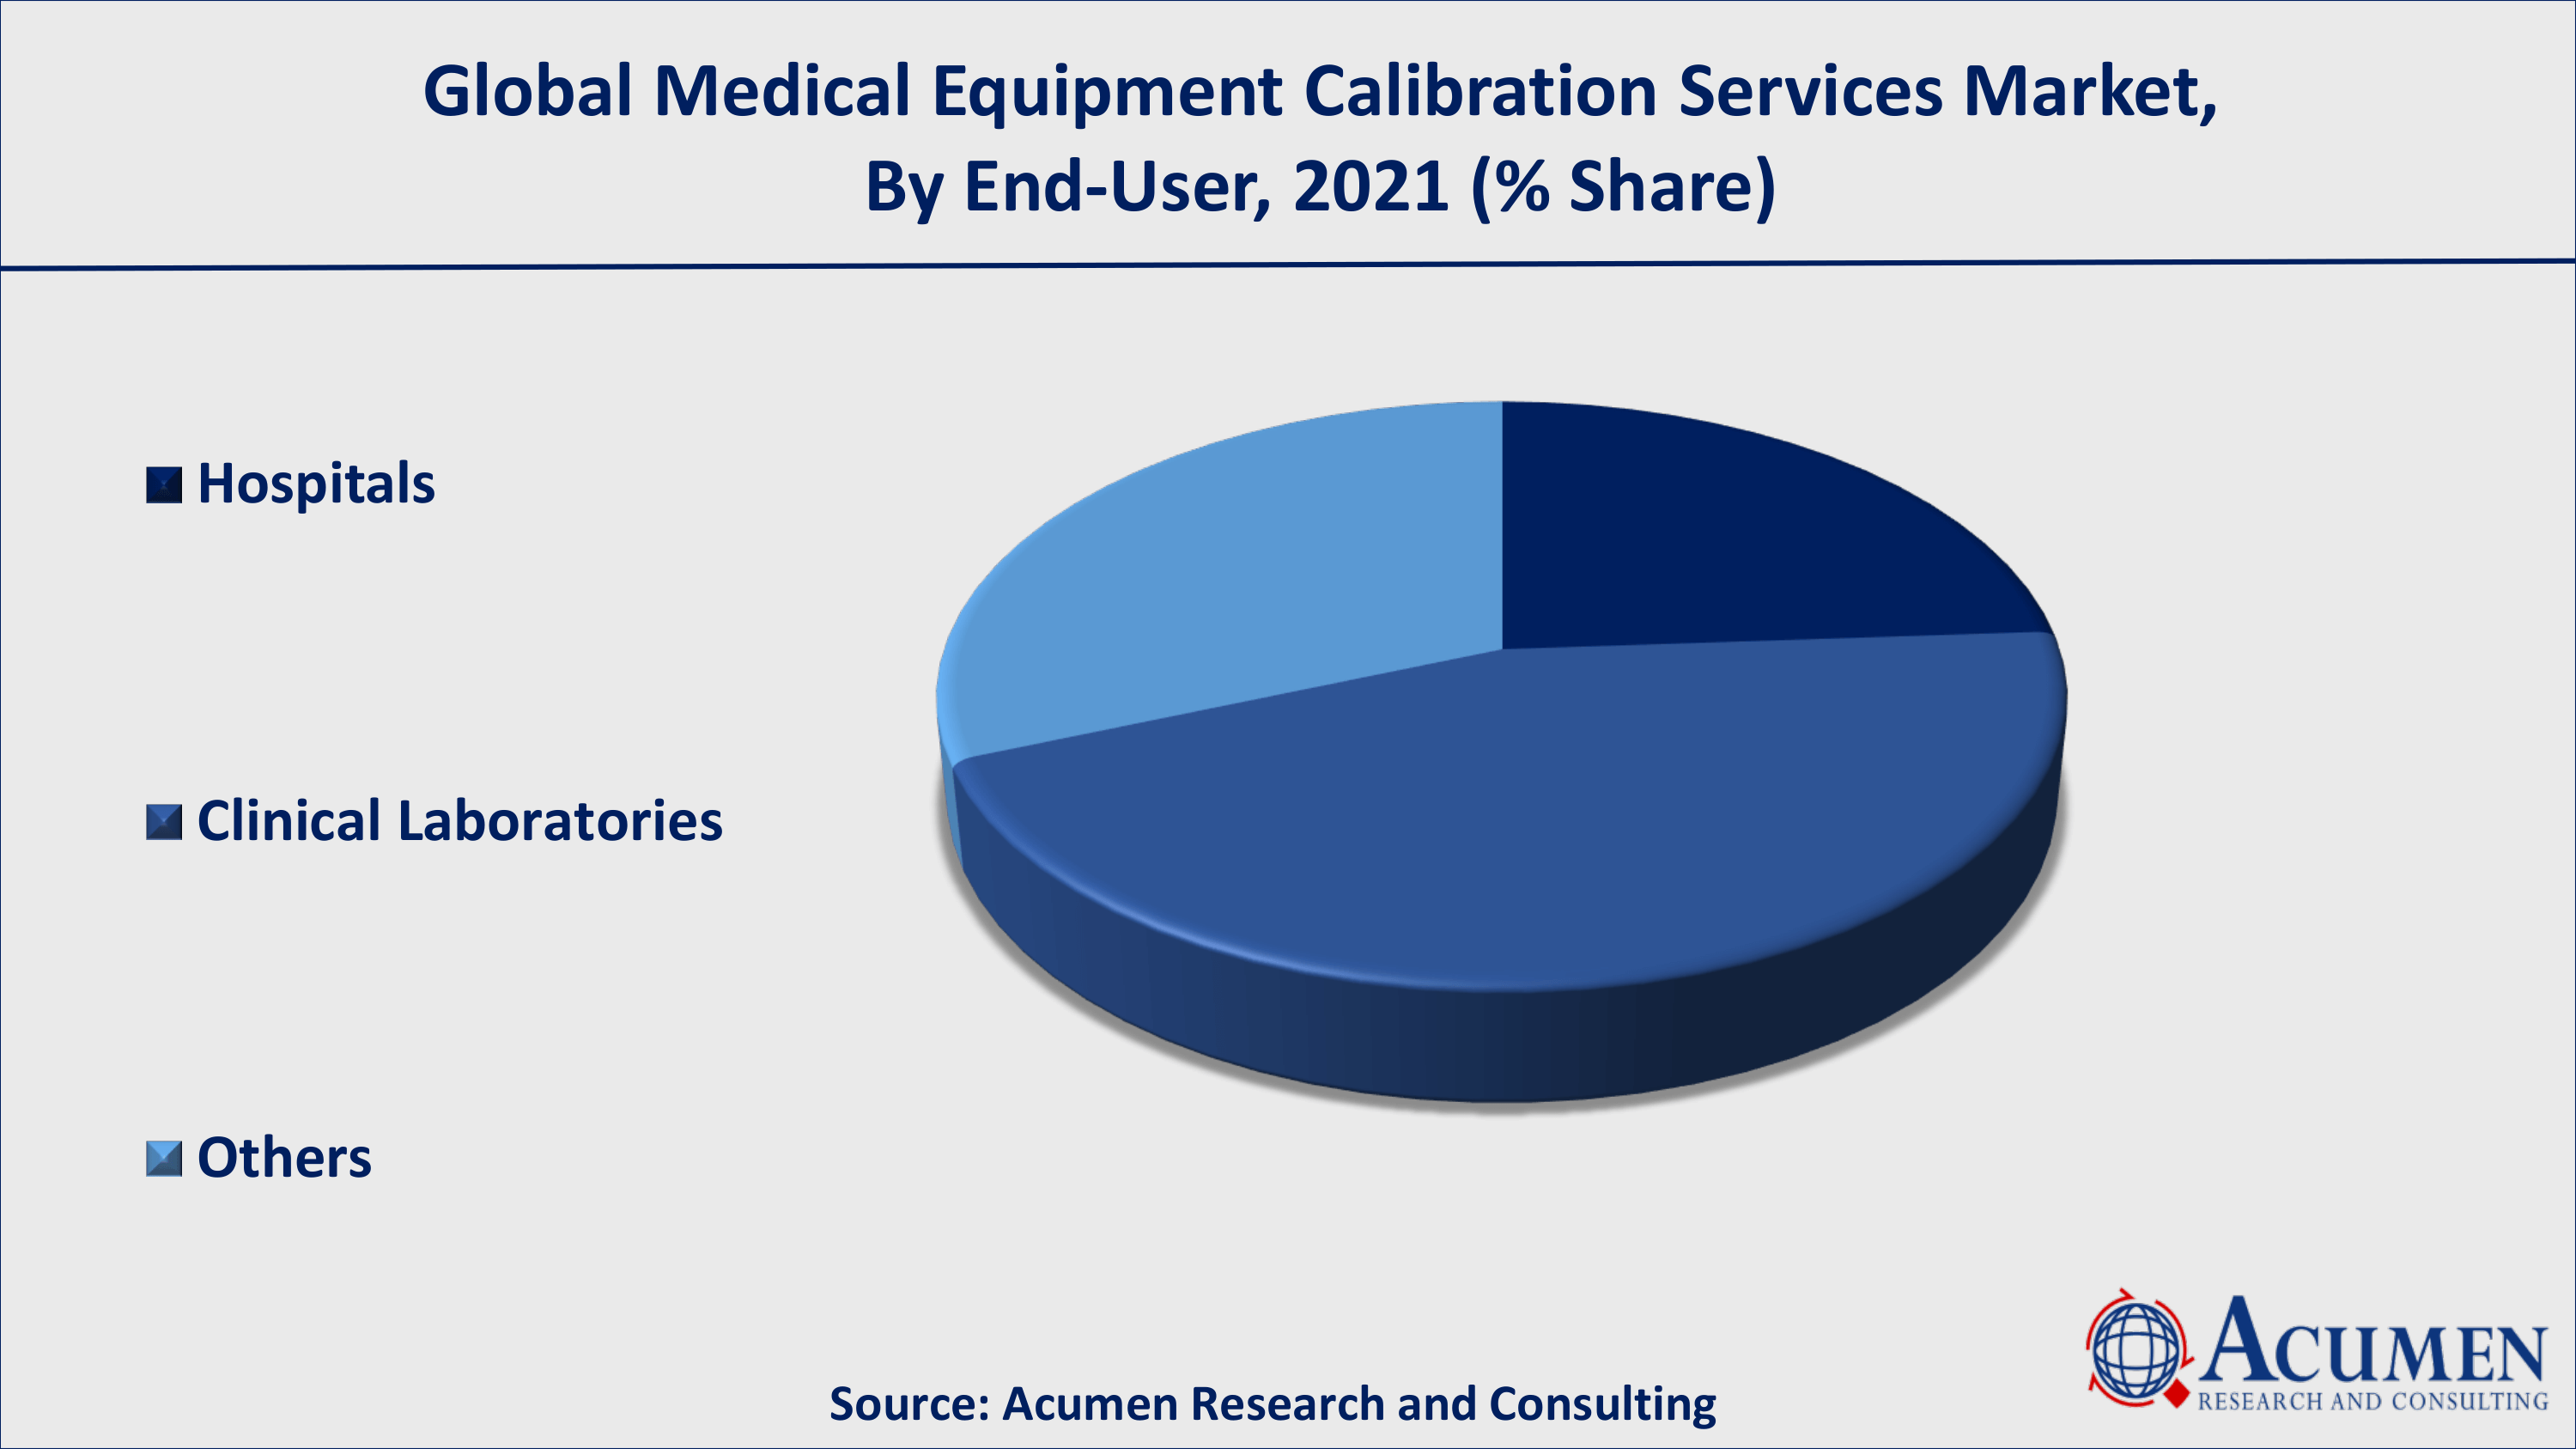 According to end-user segment, the clinical laboratories generated 45% of revenue in the global share